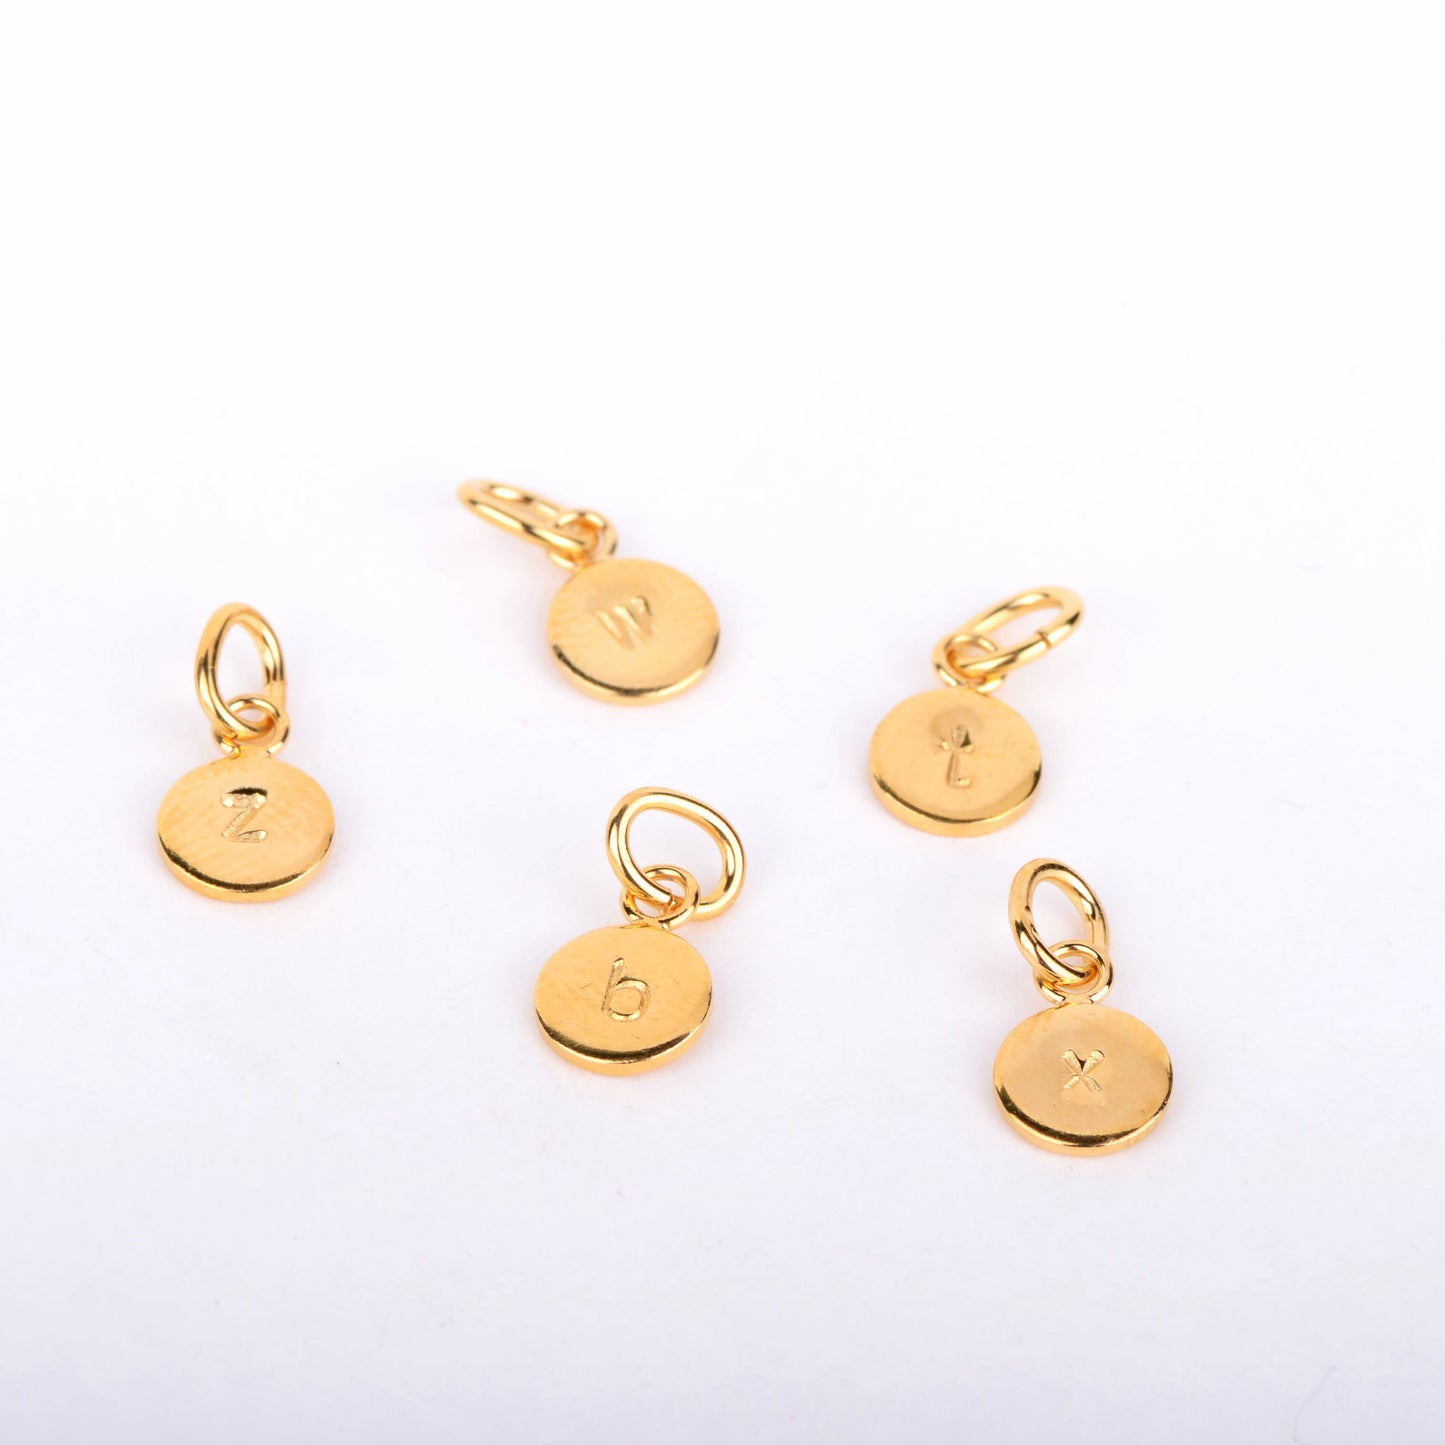 Loose pendant coin letters